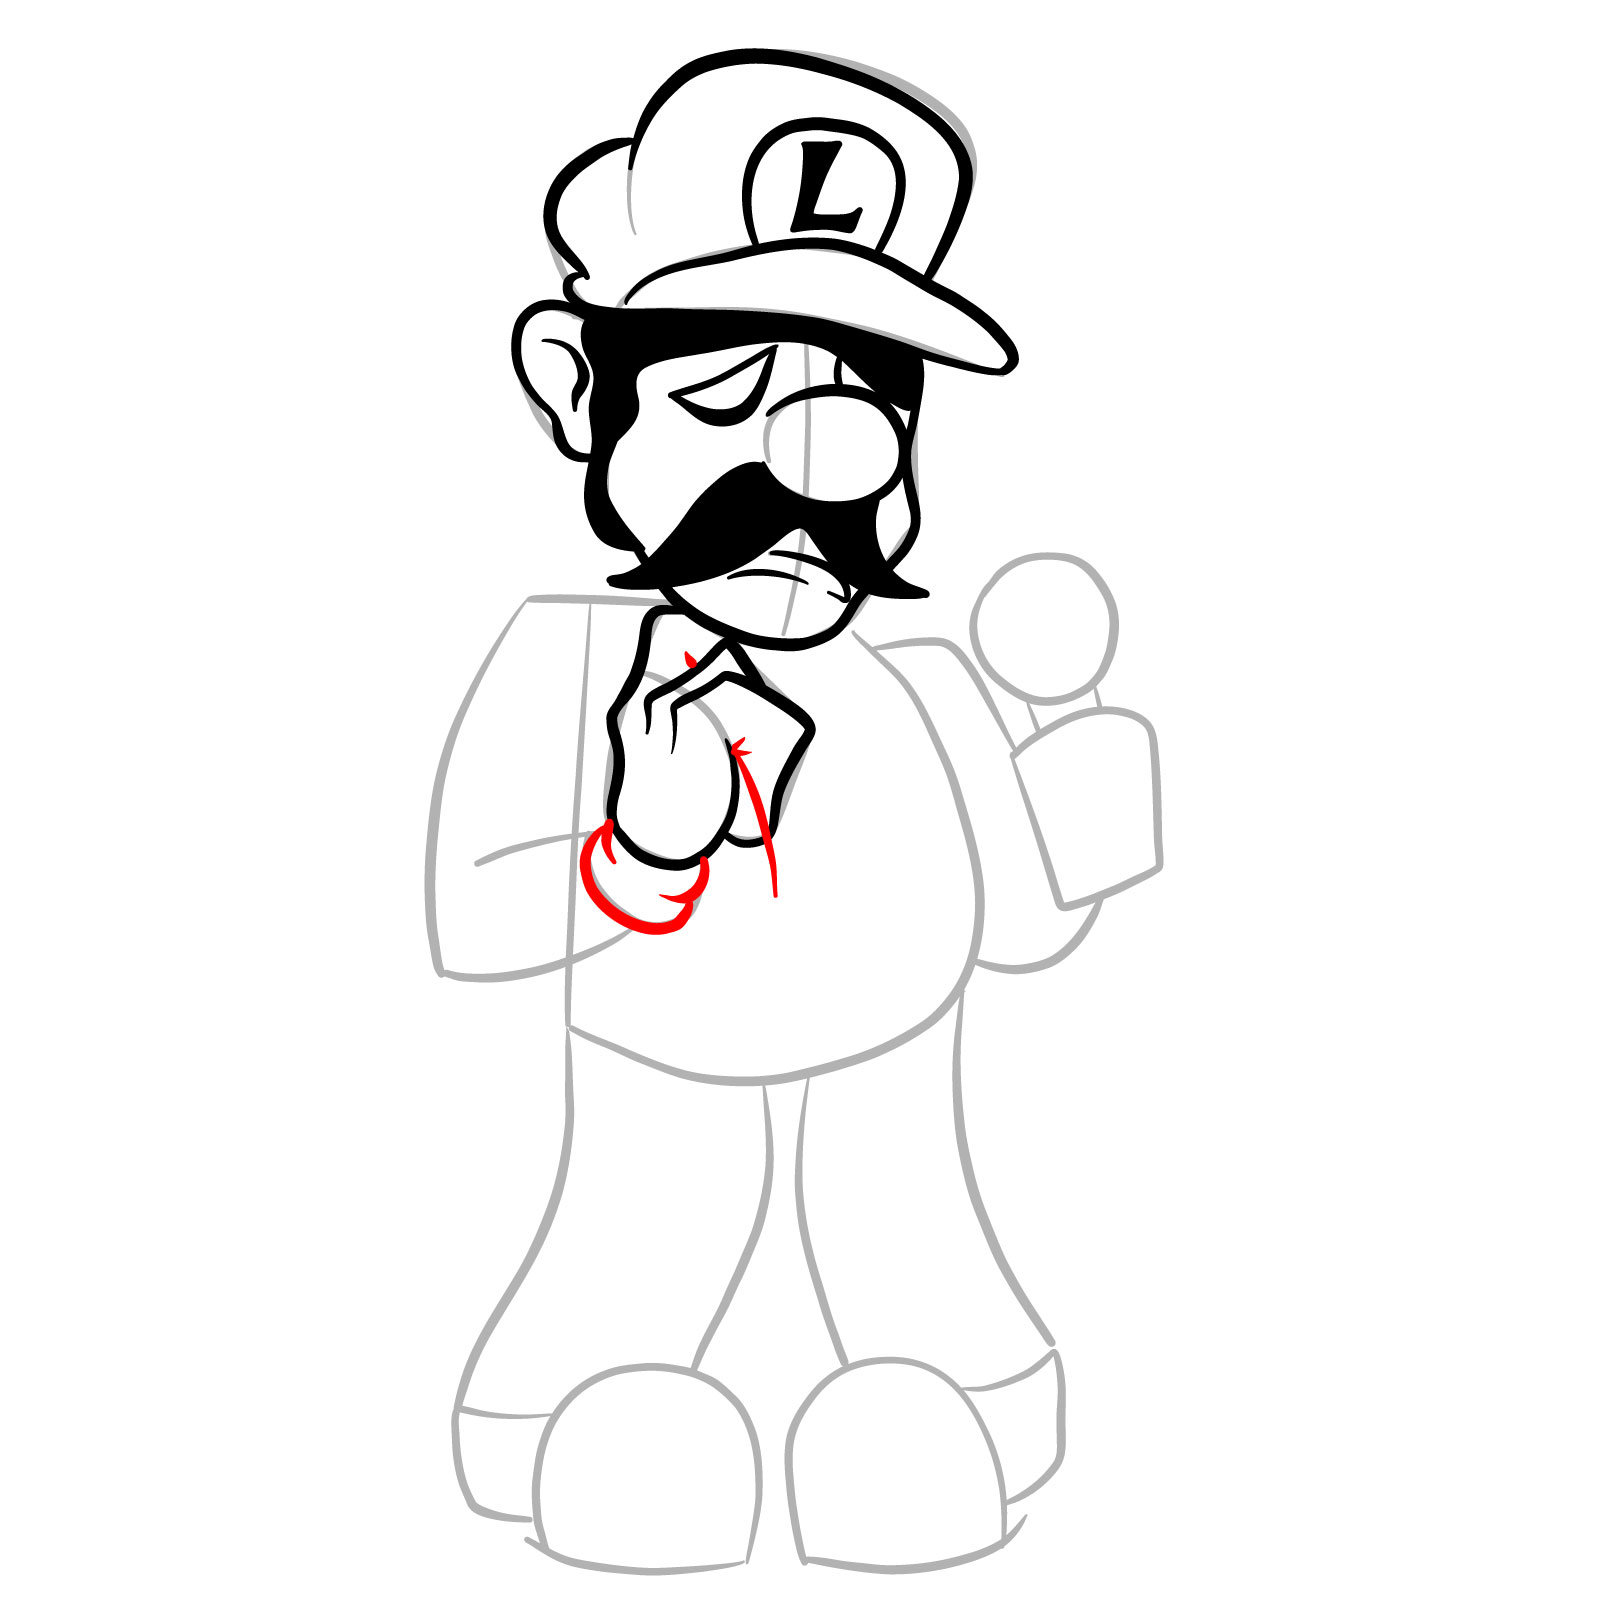 How to draw Beta Luigi from FNF - step 16